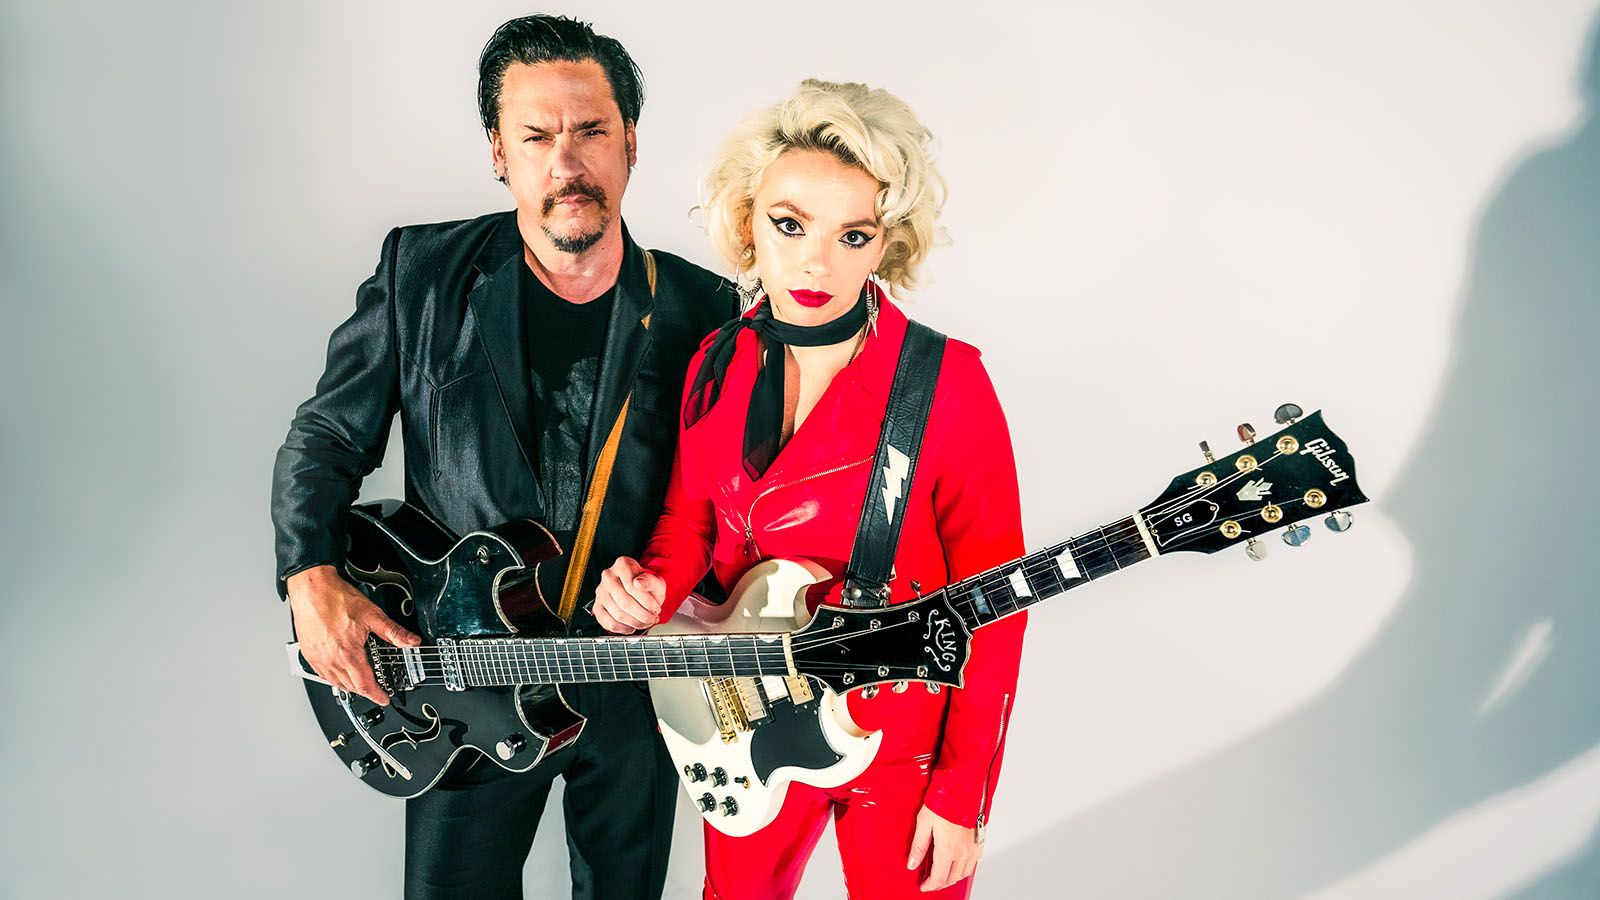 Samantha Fish and Jesse Dayton will stop by Sweetwater Performance Pavilion on Sunday, July 30, as part of their Death Wish Blues tour.